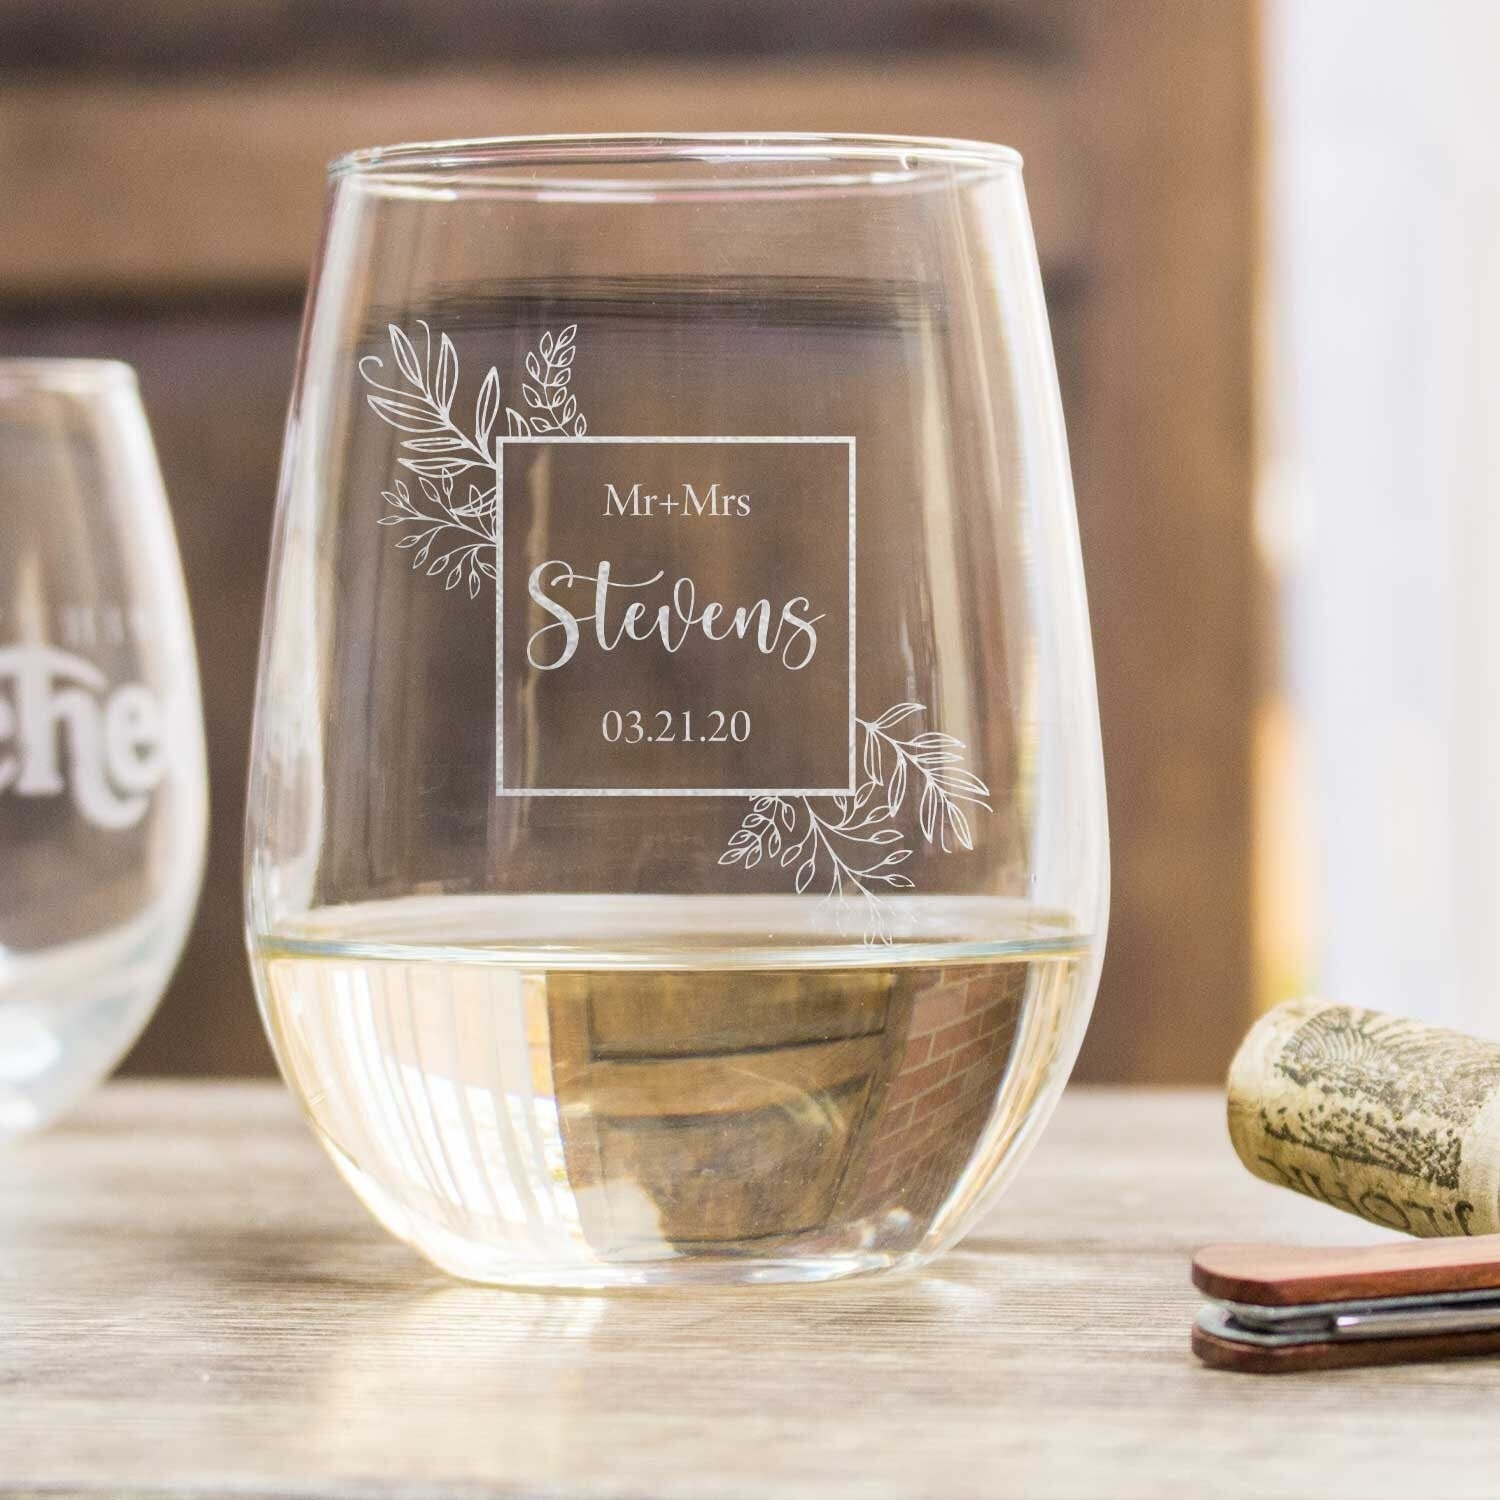 Dishwasher safe wine glass, Valentine gift, Anniversary gift, Personalized  wine glass coffee gets me started wine keeps me going